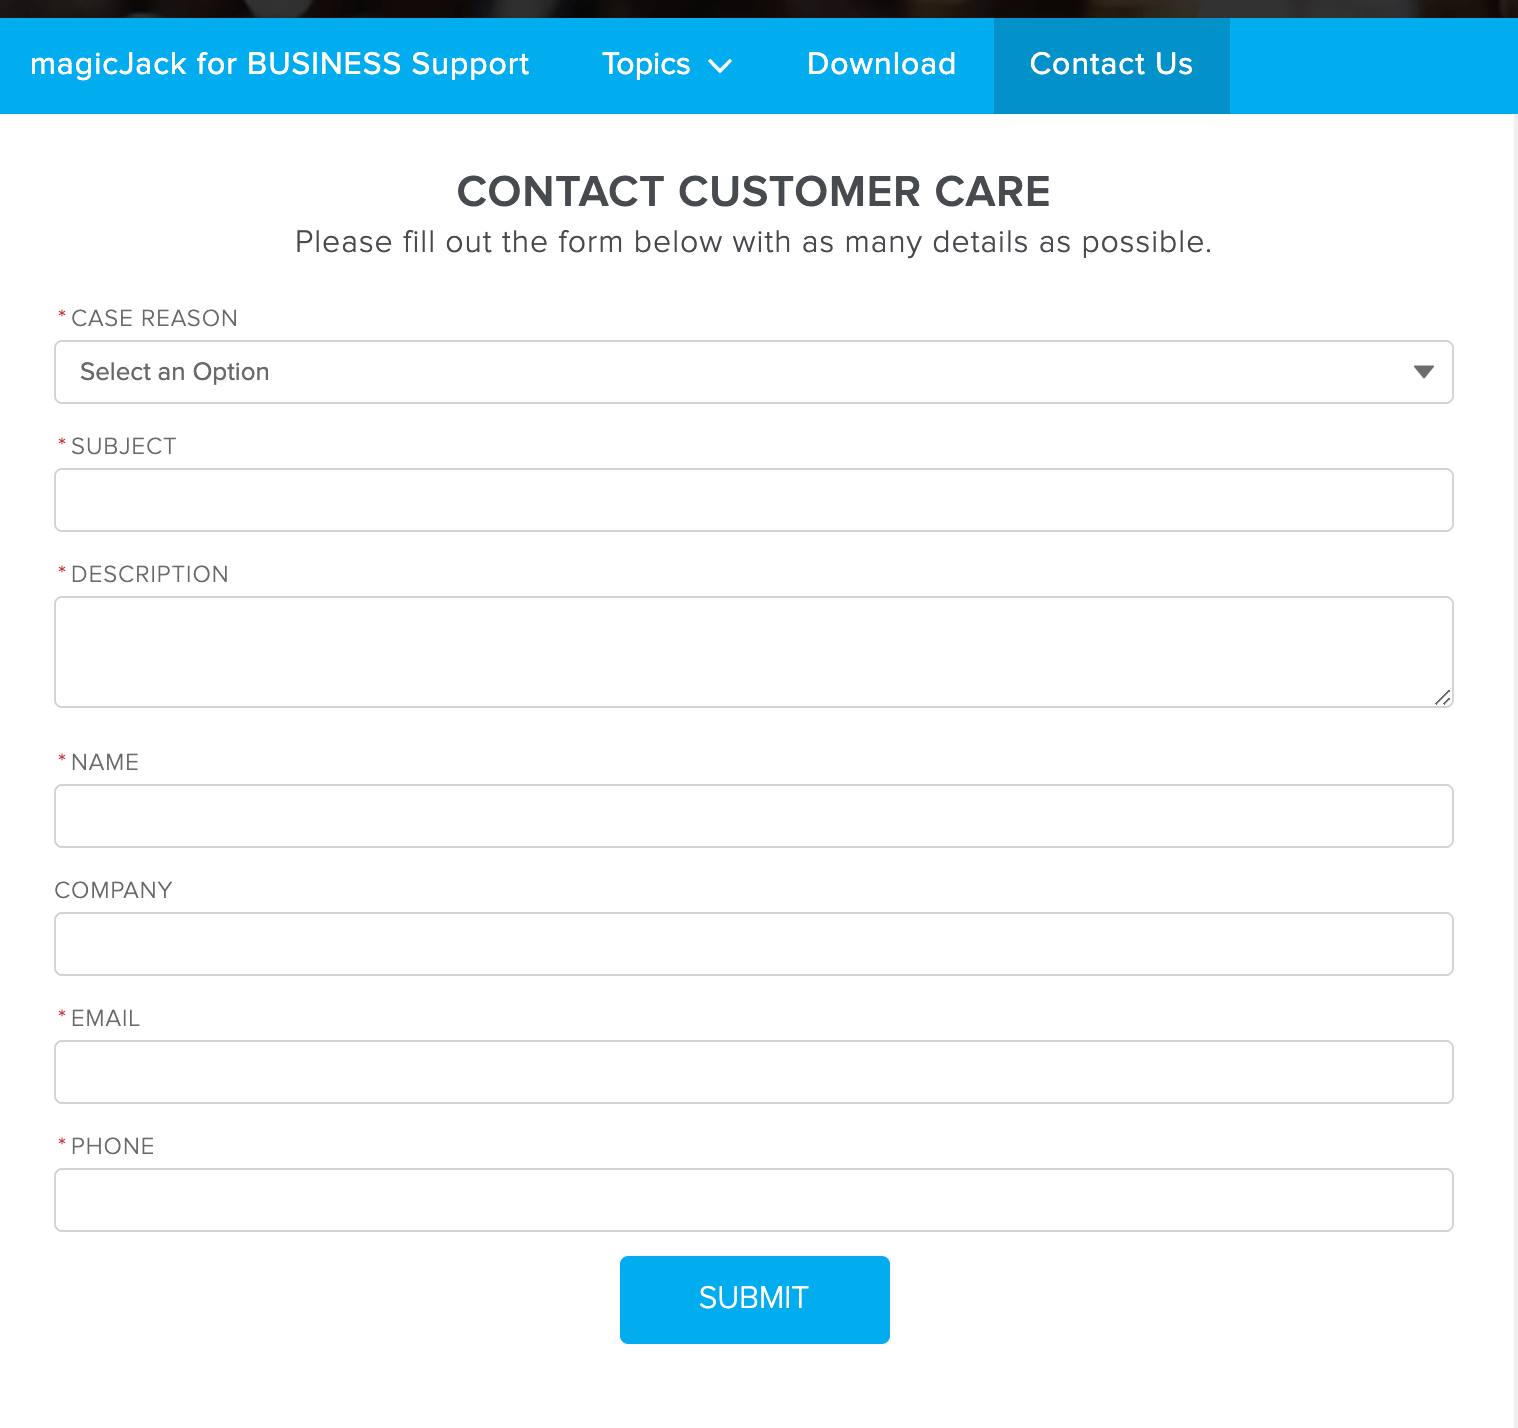 MagicJack's lengthy contact form